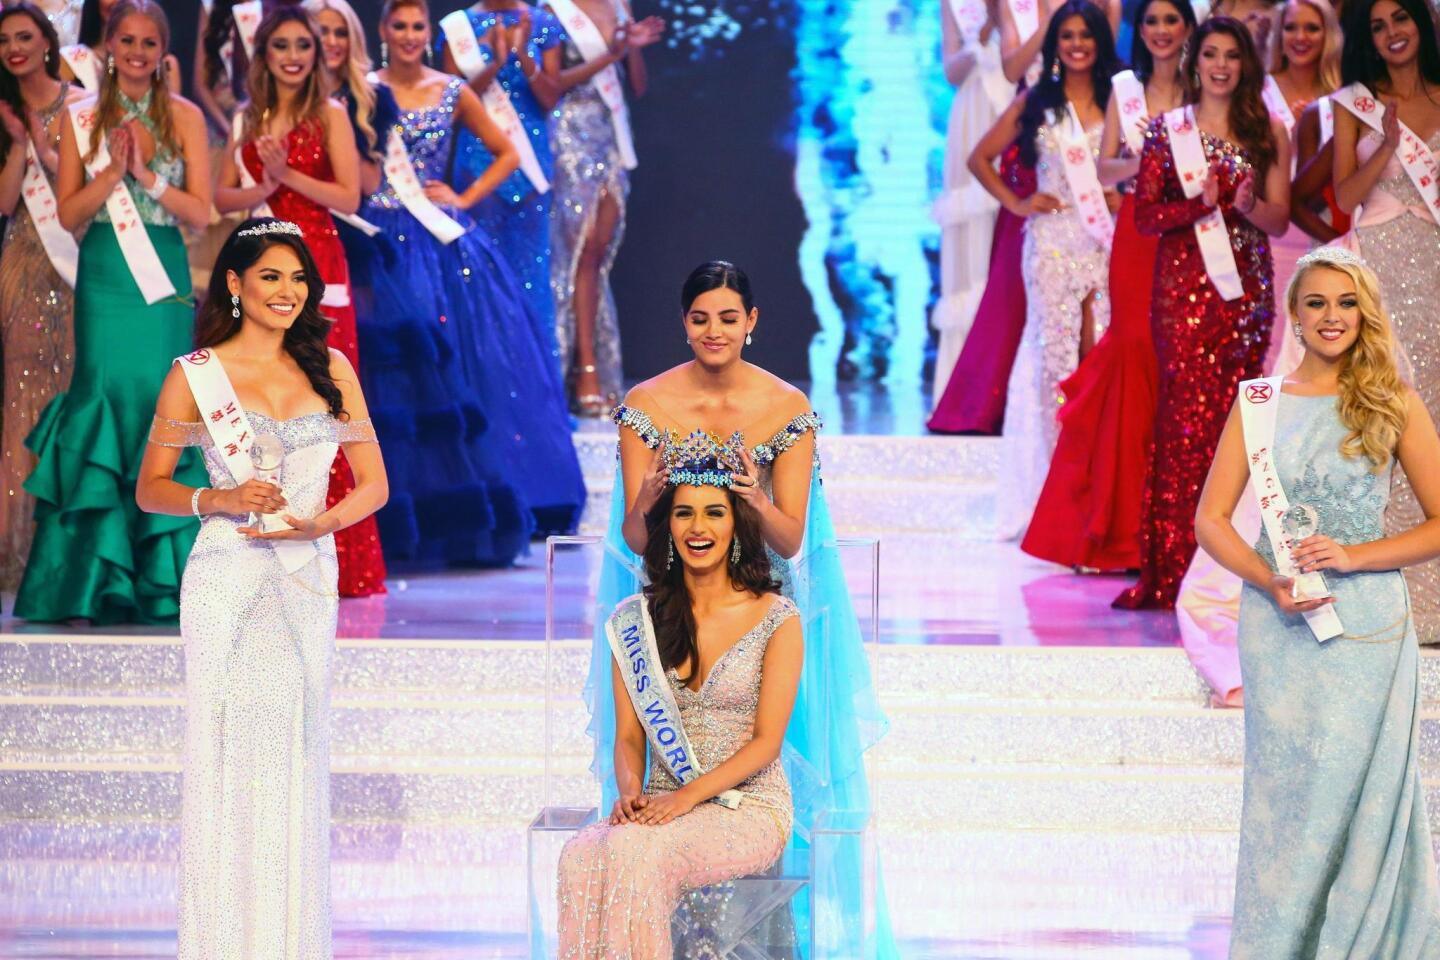 FUZ02. Sanya (China), 18/11/2017.- Puerto Rican musician and Miss World 2016 Stephanie Del Valle (C-rear) crowns Manushi Chhillar (C-front) of India, the new Miss World, as first runner-up Miss Mexico Alma Andrea Meza Carmona (L) and second runner-up Miss England Stephanie Jayne Hill (R) watch during the award ceremony of the Miss World 2017 contest in Sanya, Hainan province, China, 18 November 2017.